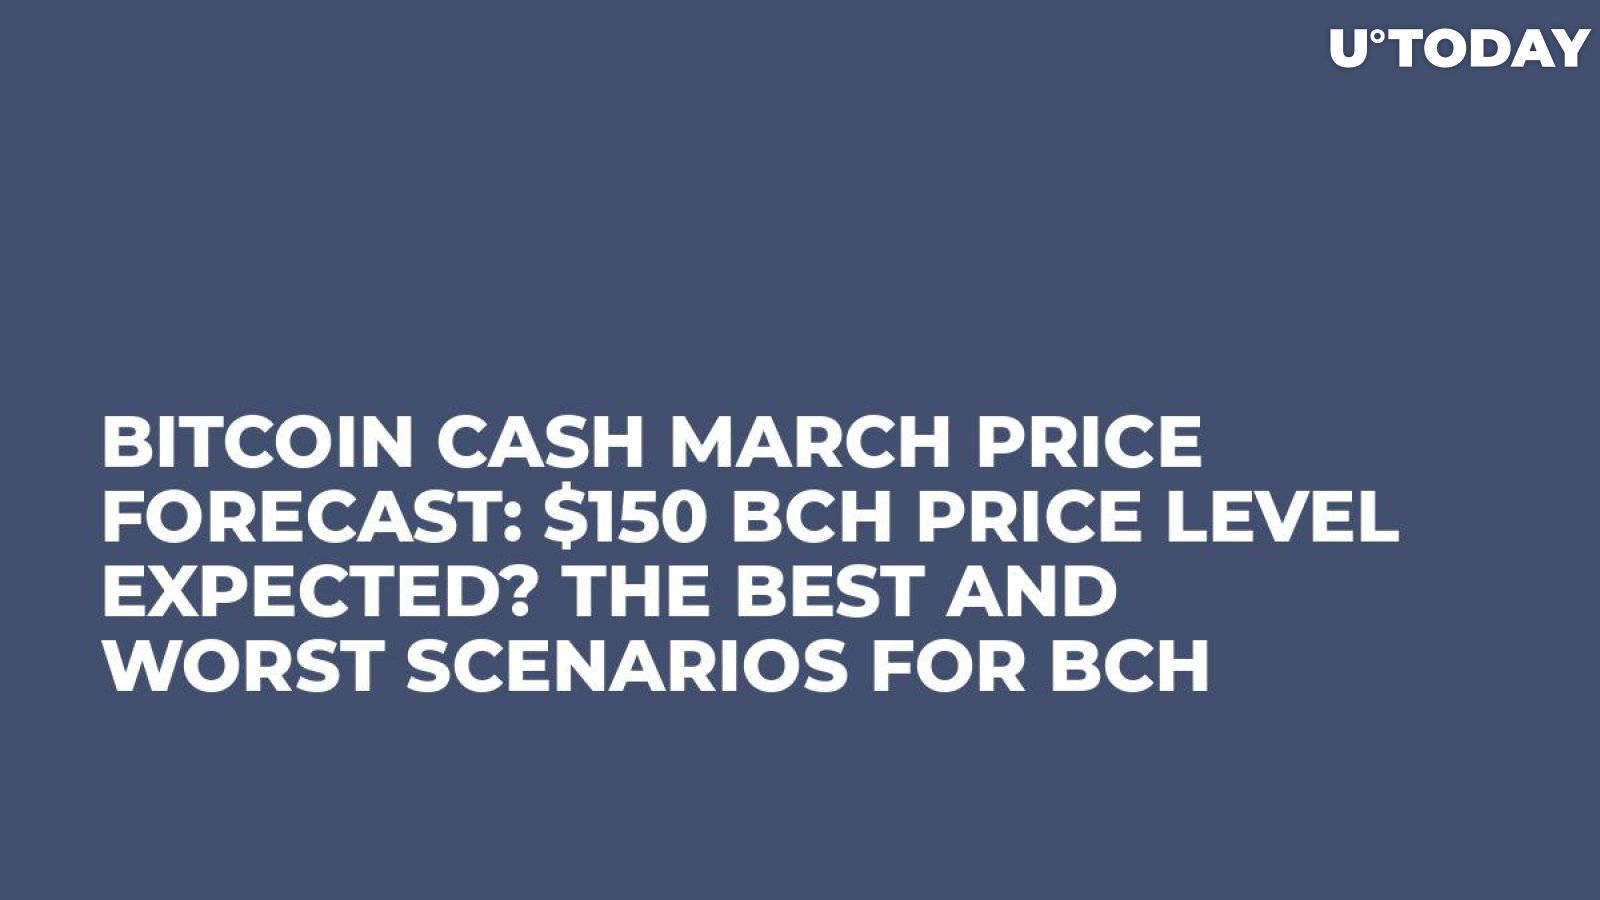 Bitcoin Cash March Price Forecast: $150 BCH Price Level Expected? The Best and Worst Scenarios for BCH